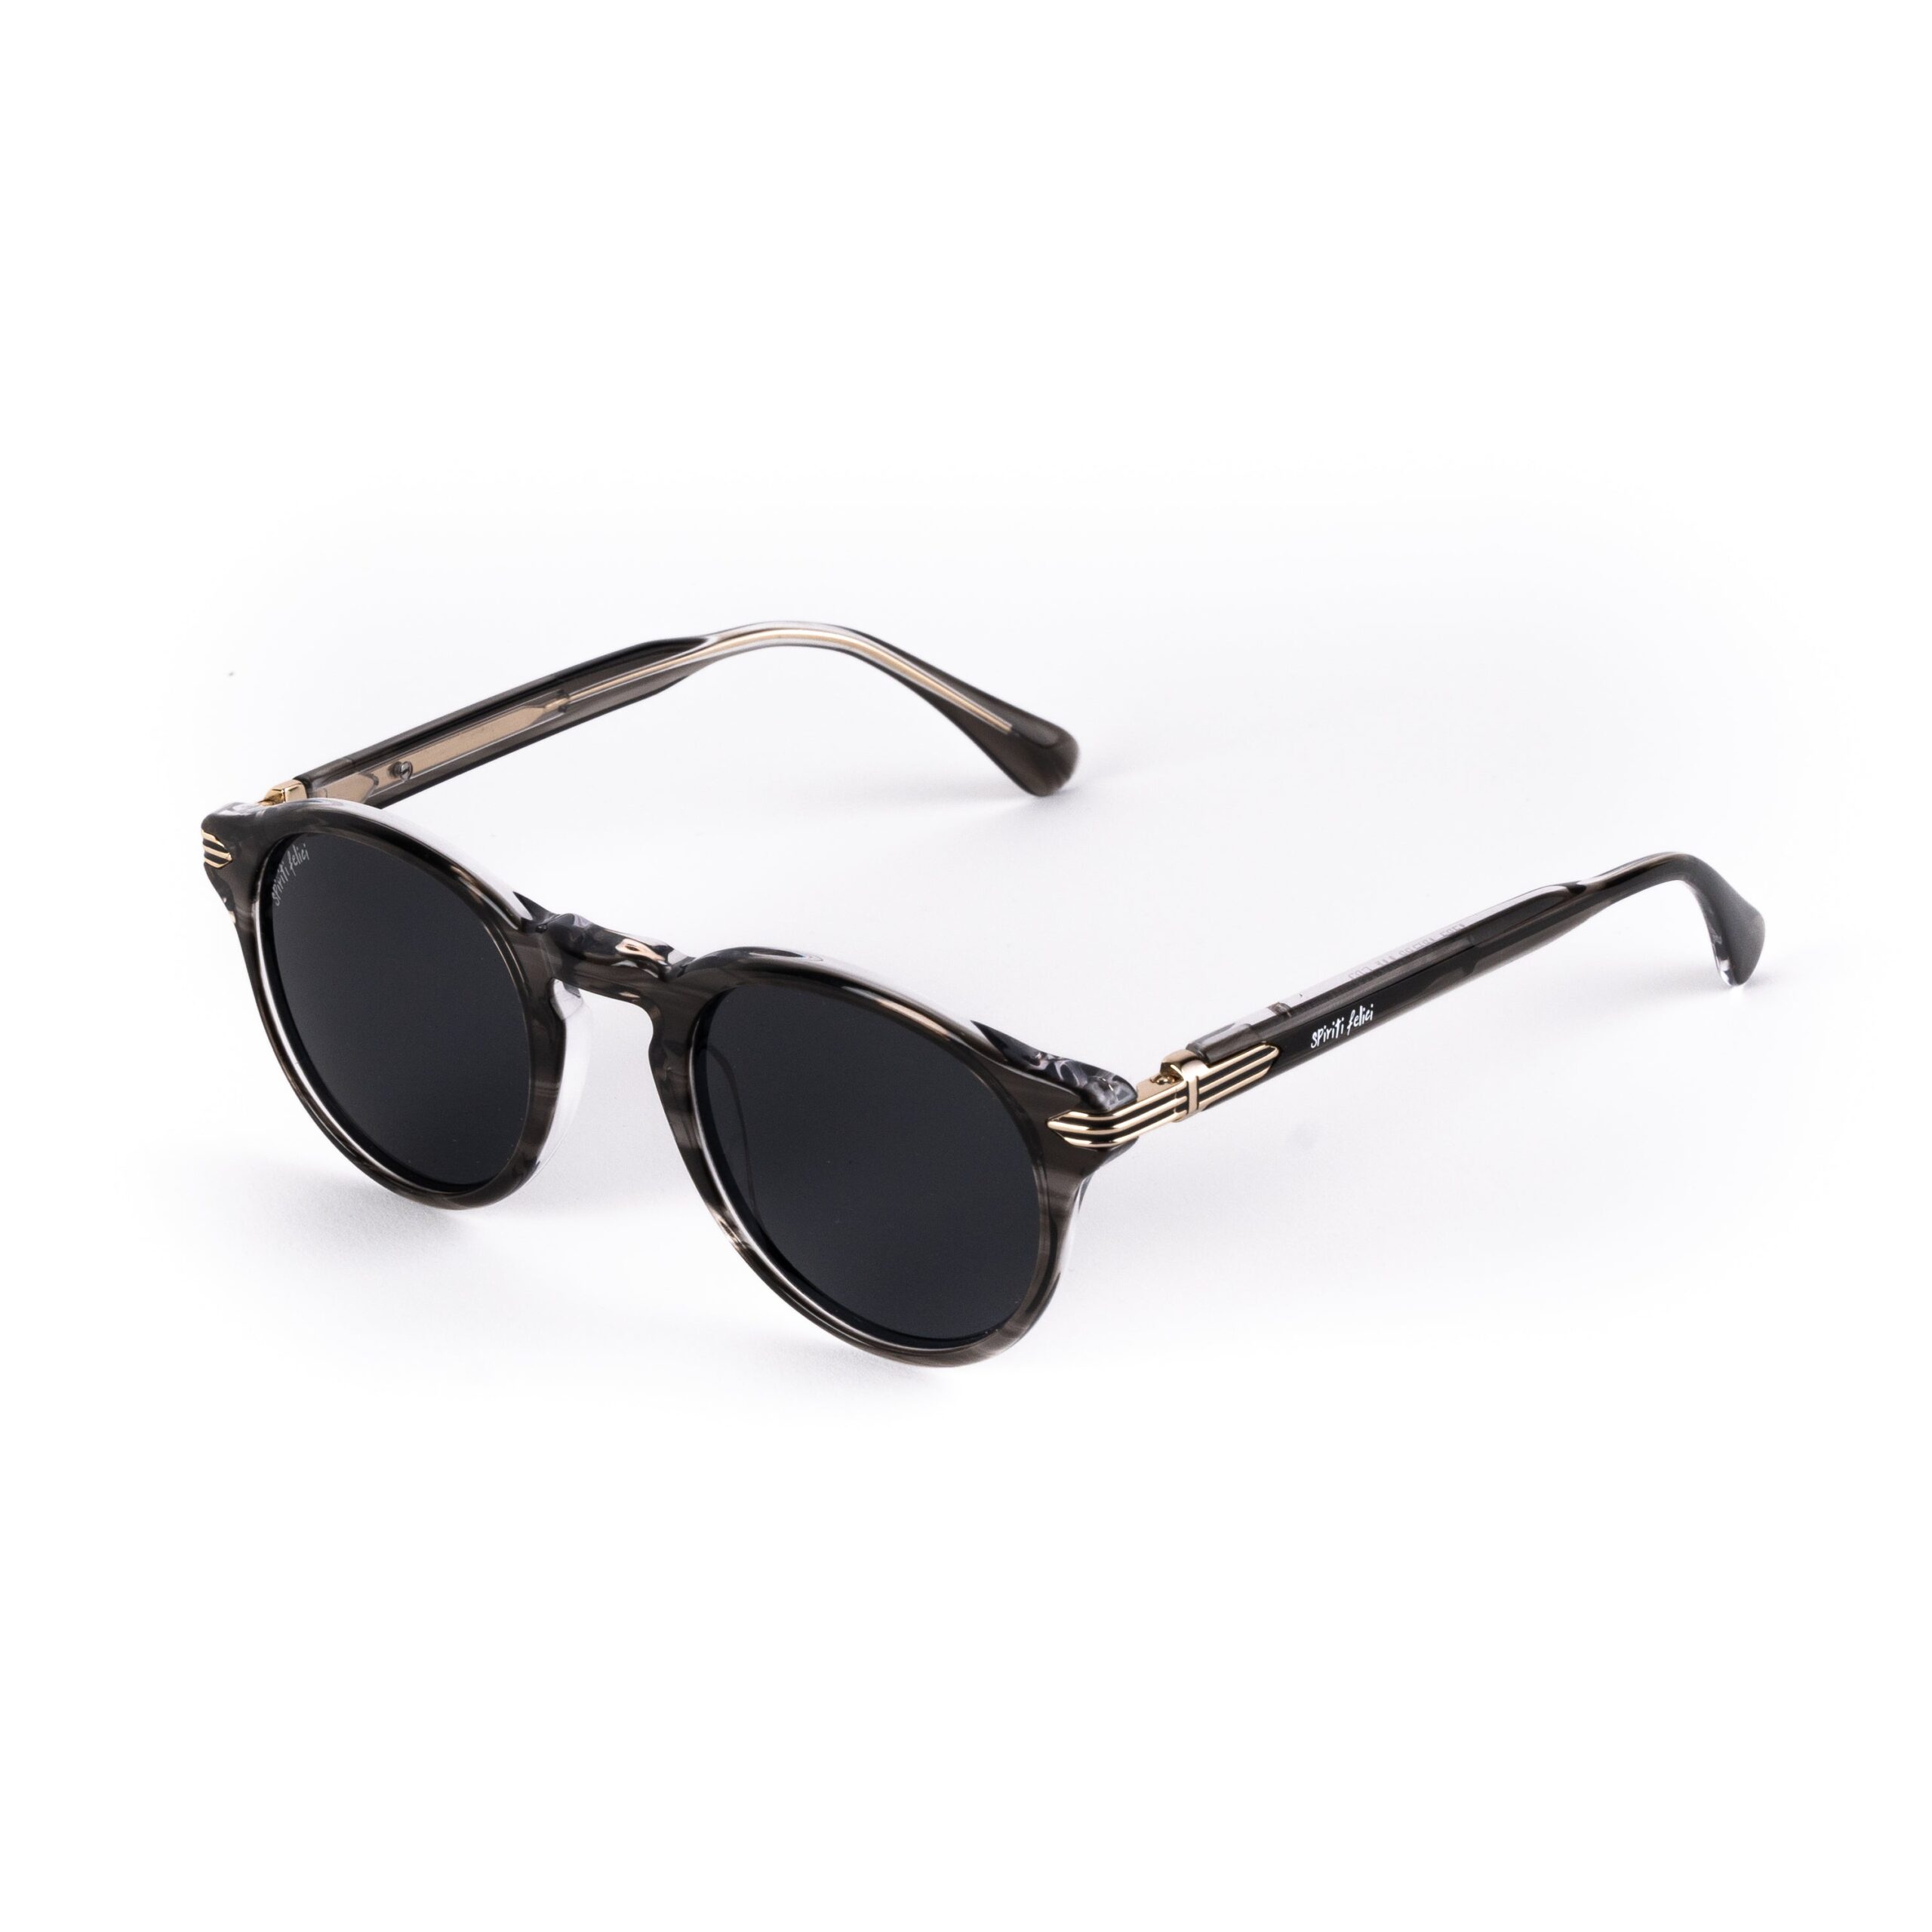 Buy RAIL sunglasses from Spiriti Felici available online at VEND. Explore more product category collections now